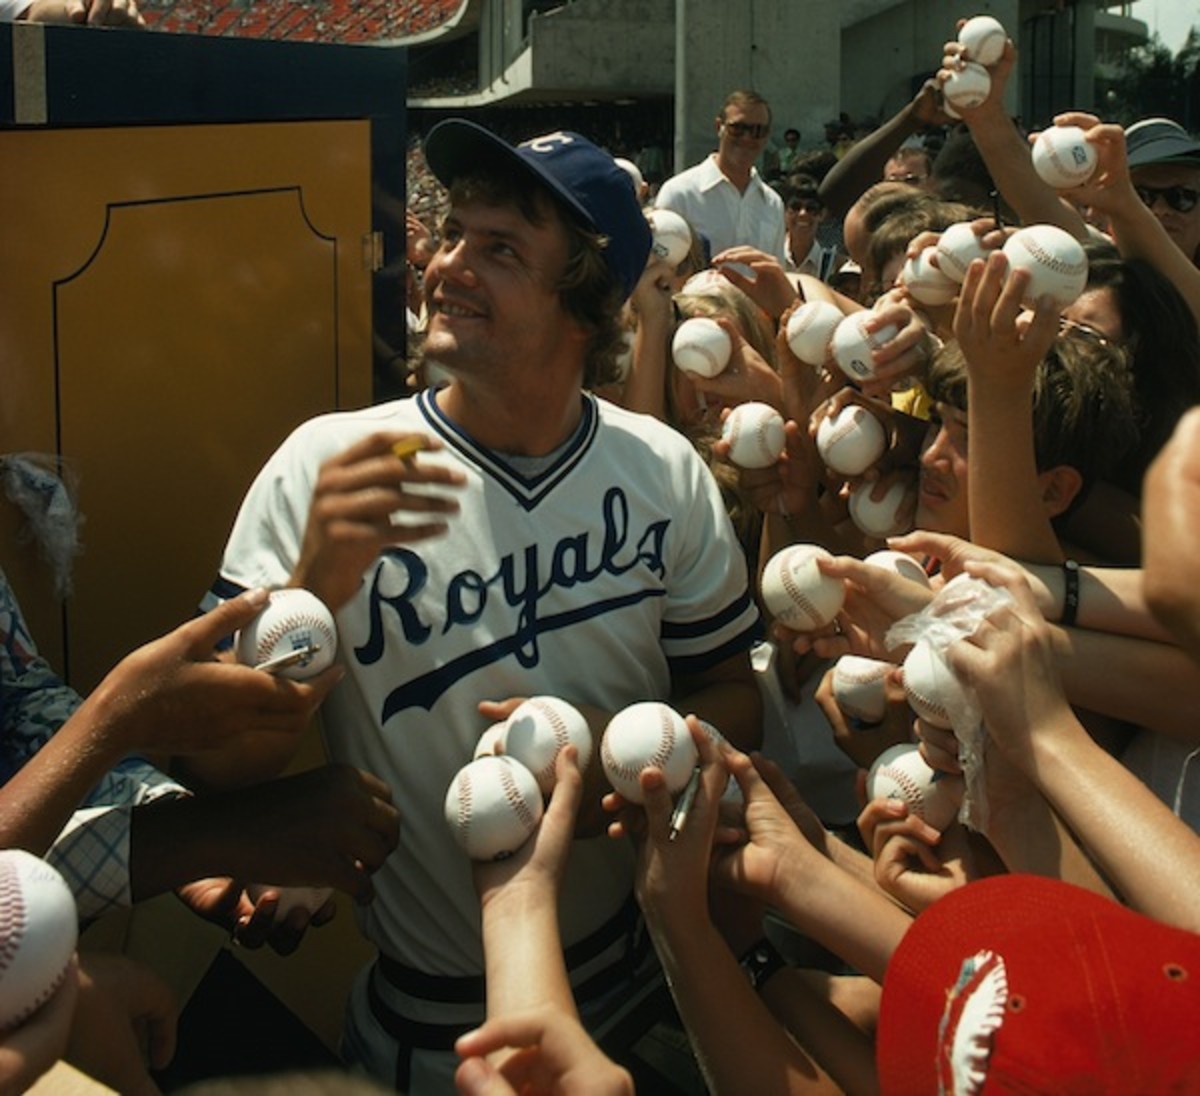 Lorde's Royals Was Inspired by George Brett and the Kansas City Royals -  Sports Illustrated